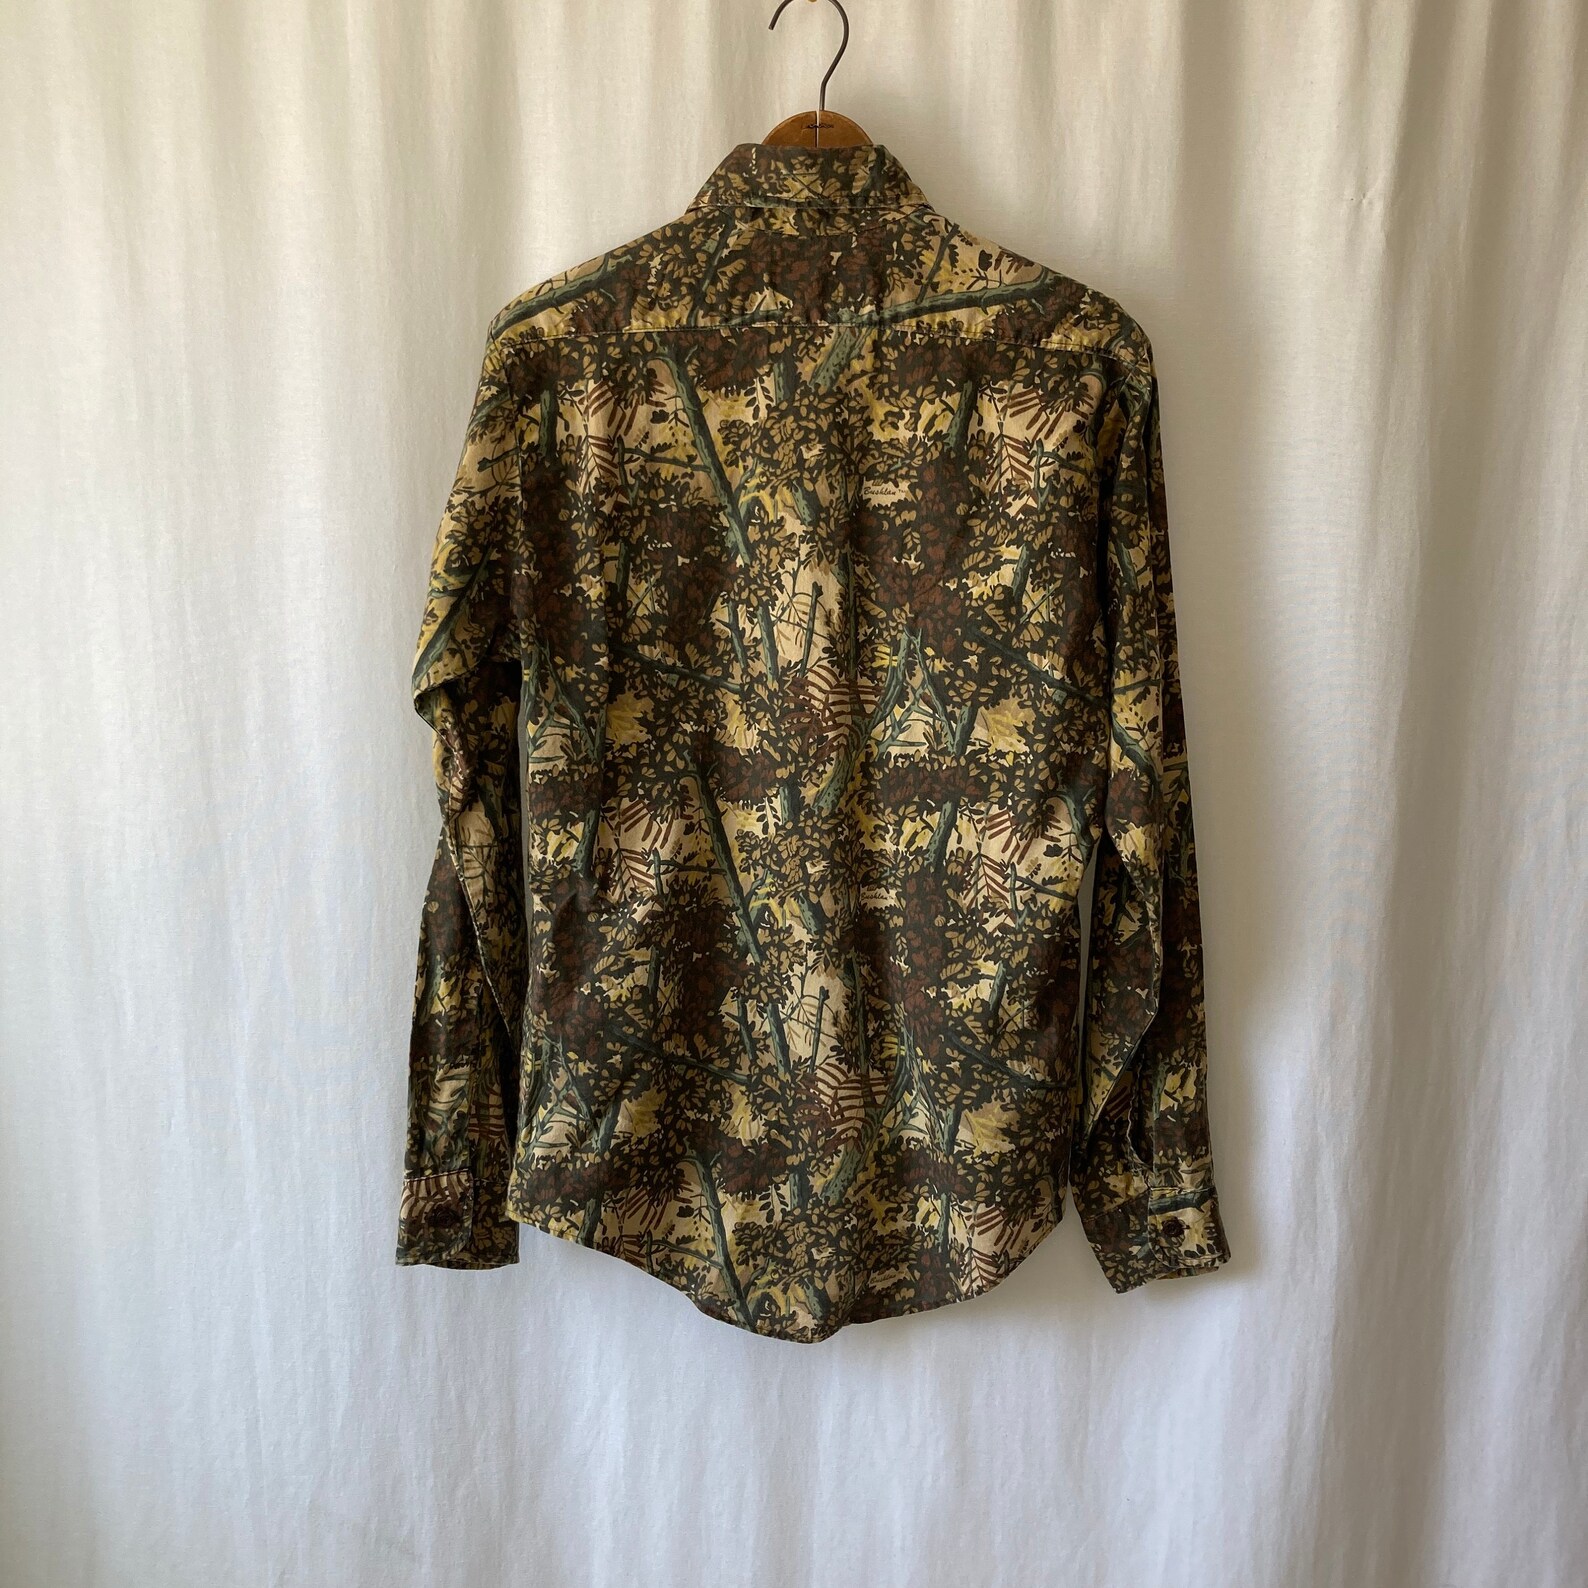 1980s Camo Print Shirt by BUSHLAN, Size M Made in USA - Etsy